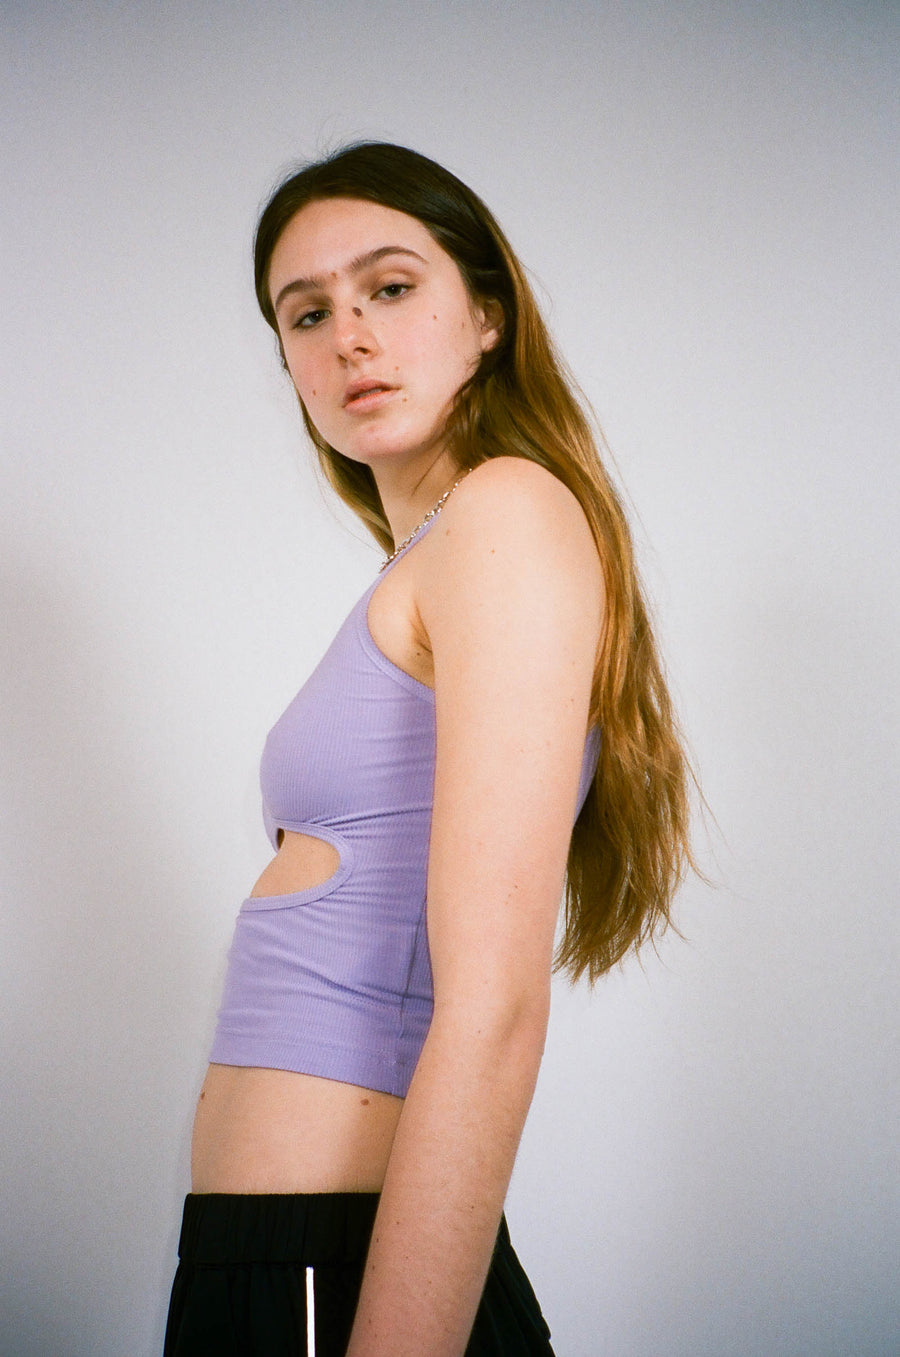 Riblet Tank in Lilac